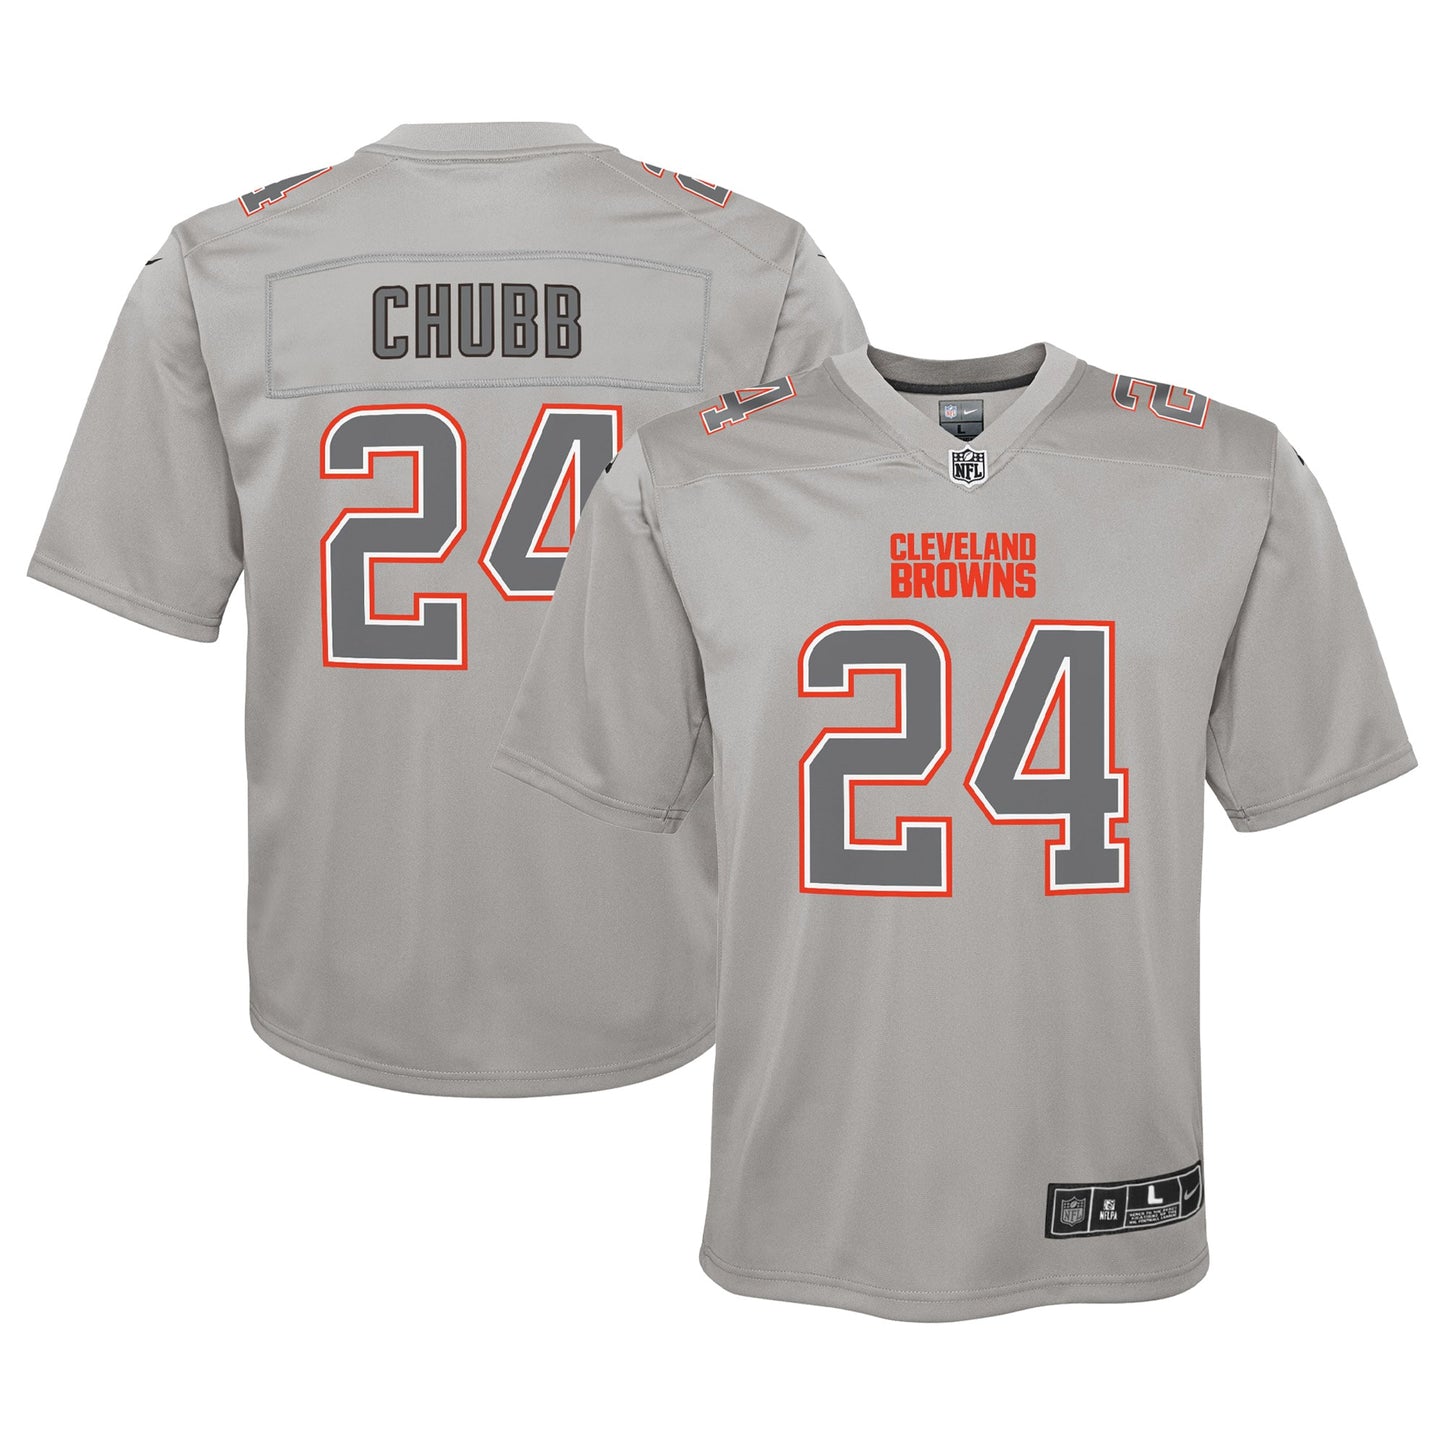 Nick Chubb Cleveland Browns Nike Youth Atmosphere Game Jersey - Gray